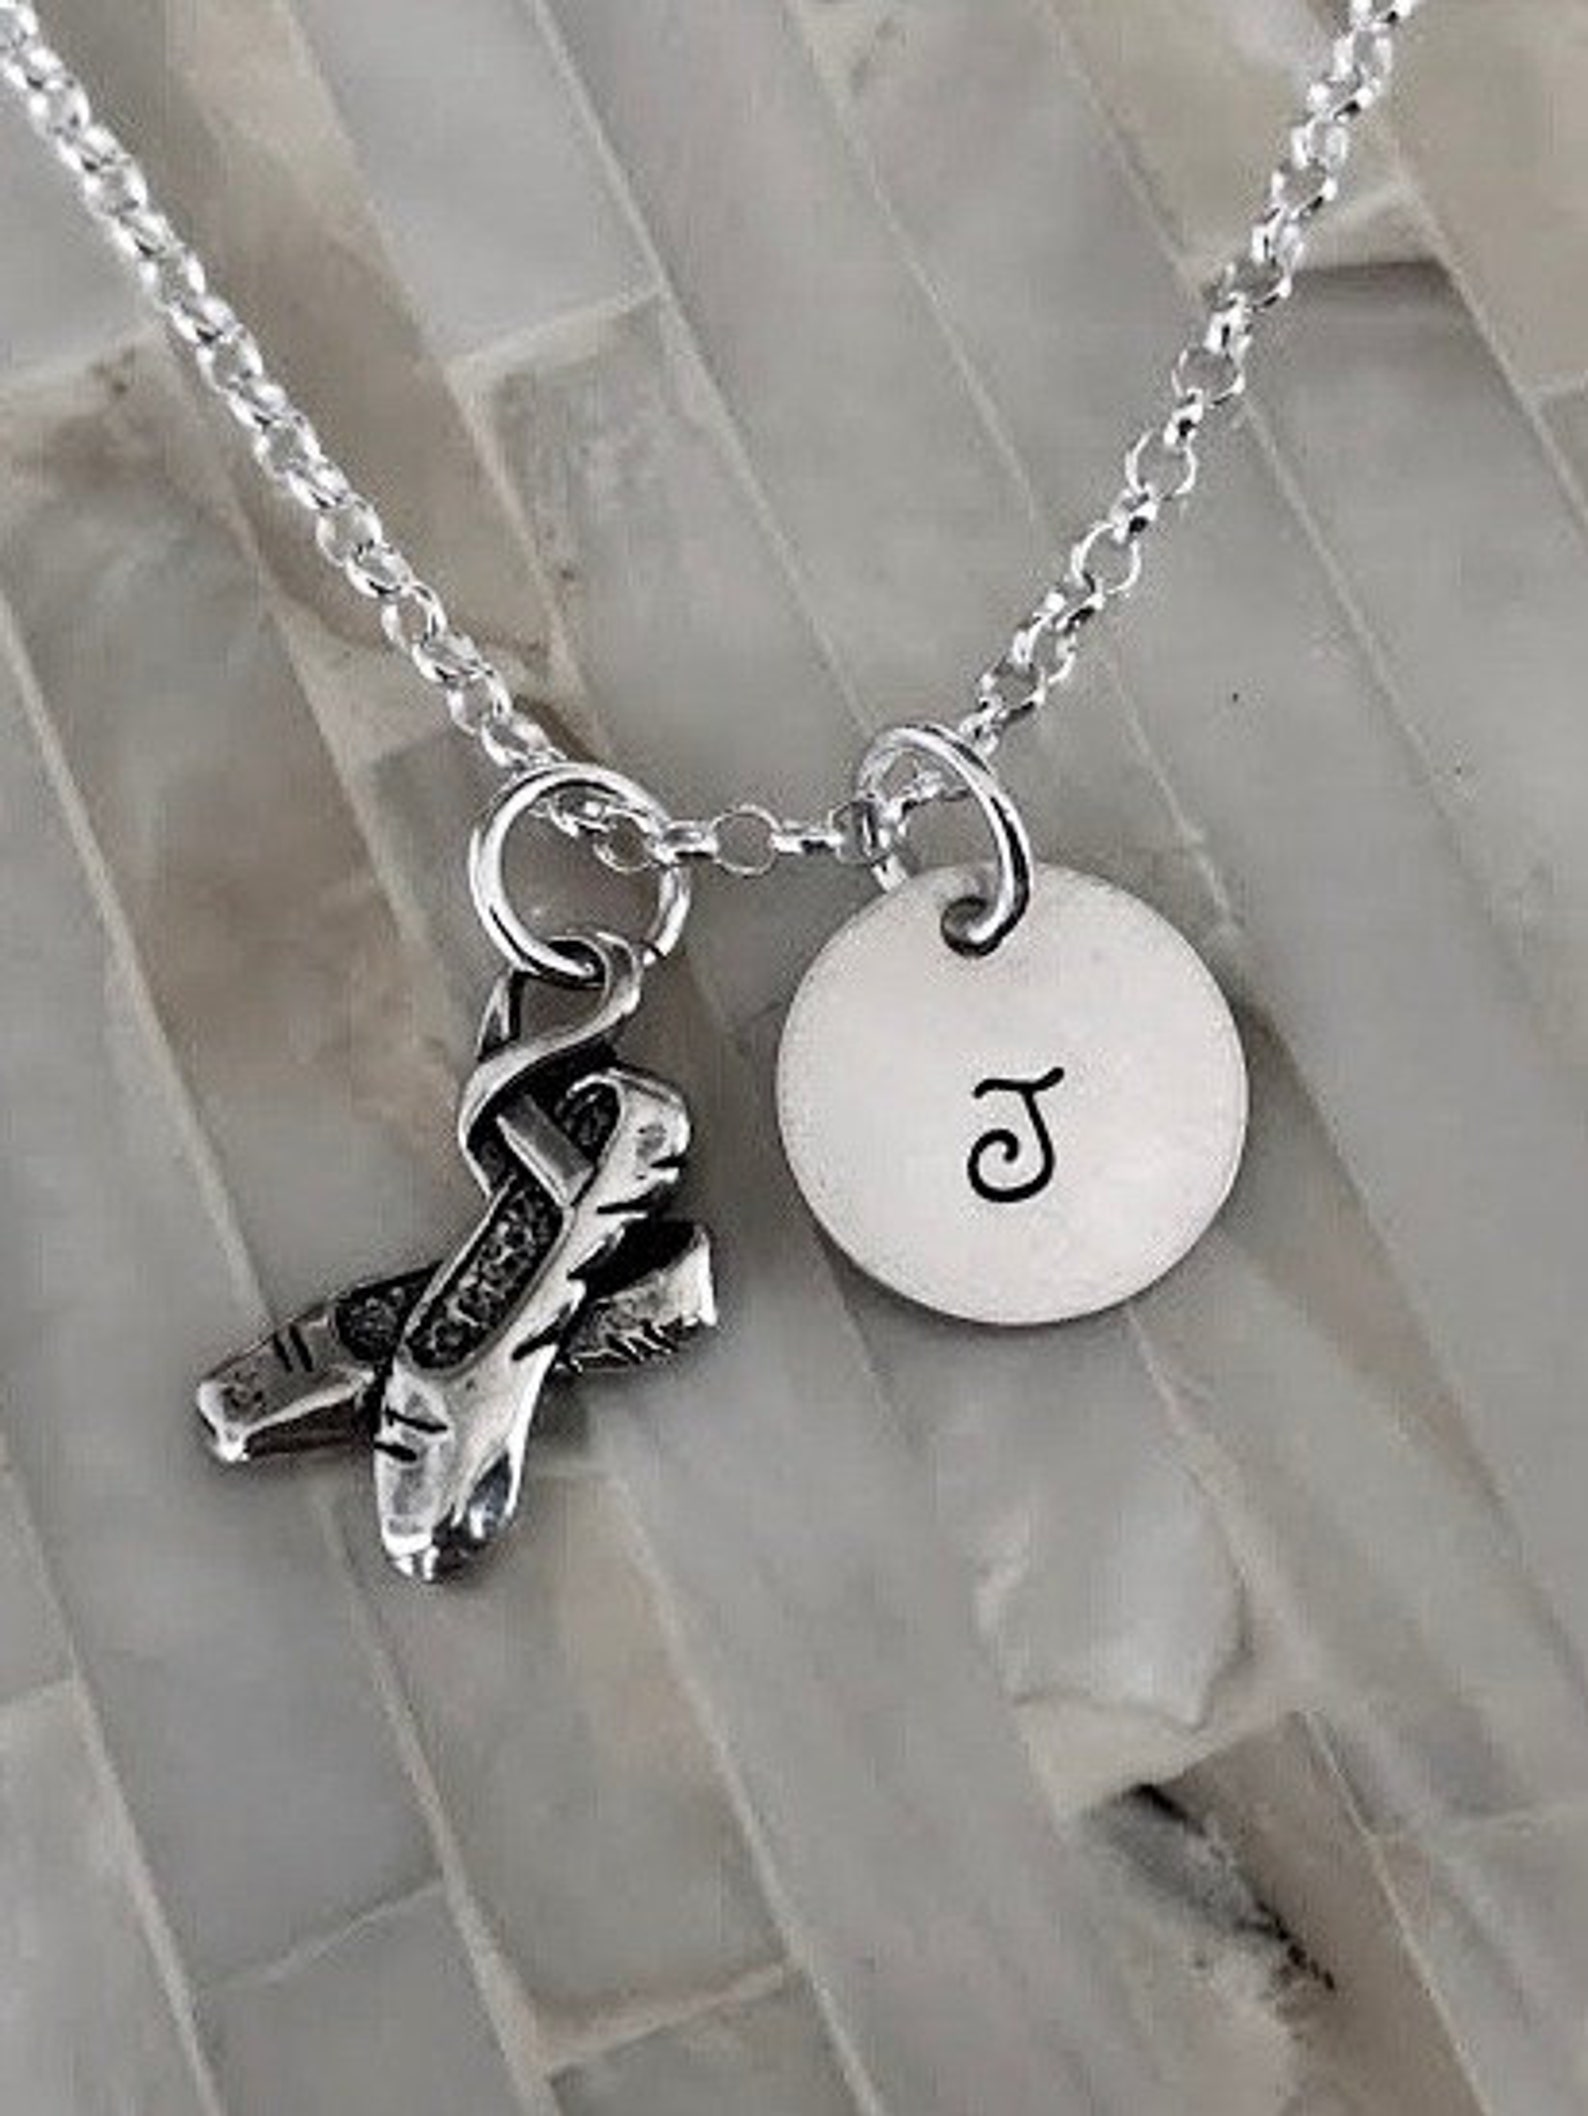 ballet initial necklace- personalized tap dancer gift- sterling silver- ballerina jewelry- recital gift- dance coach- ballet sli